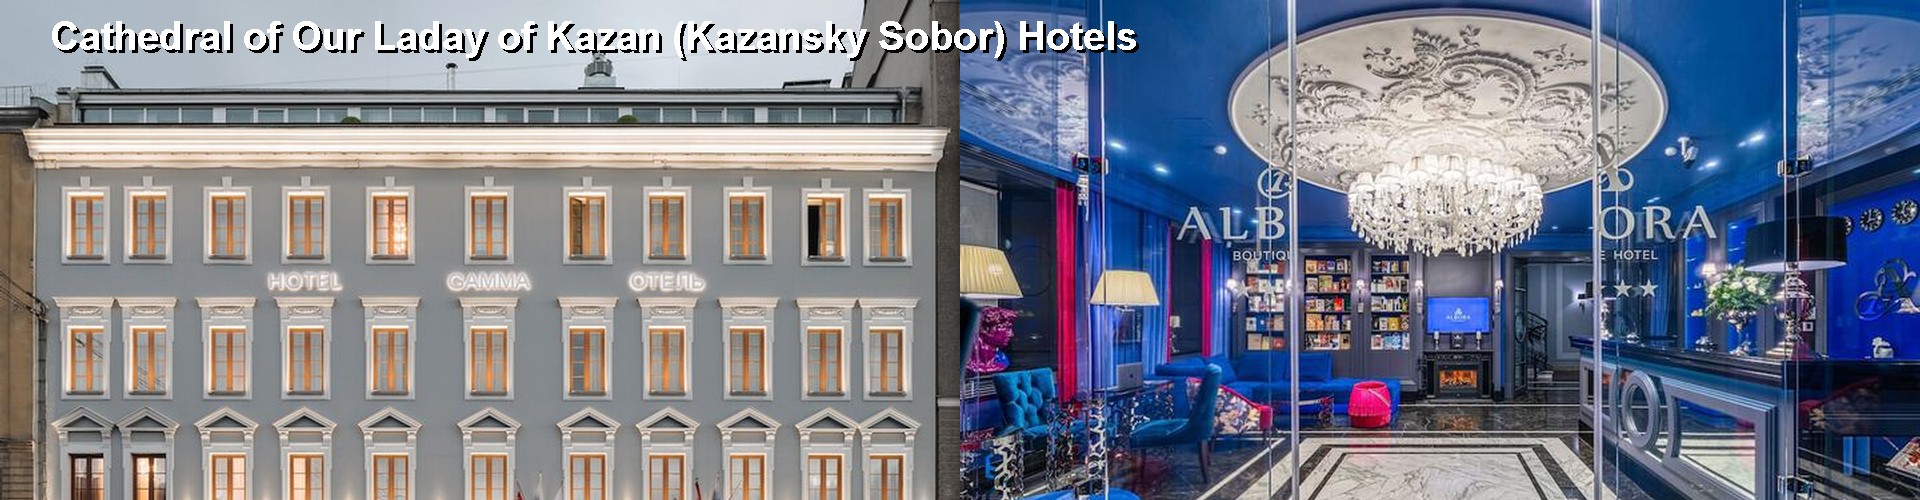 5 Best Hotels near Cathedral of Our Laday of Kazan (Kazansky Sobor)